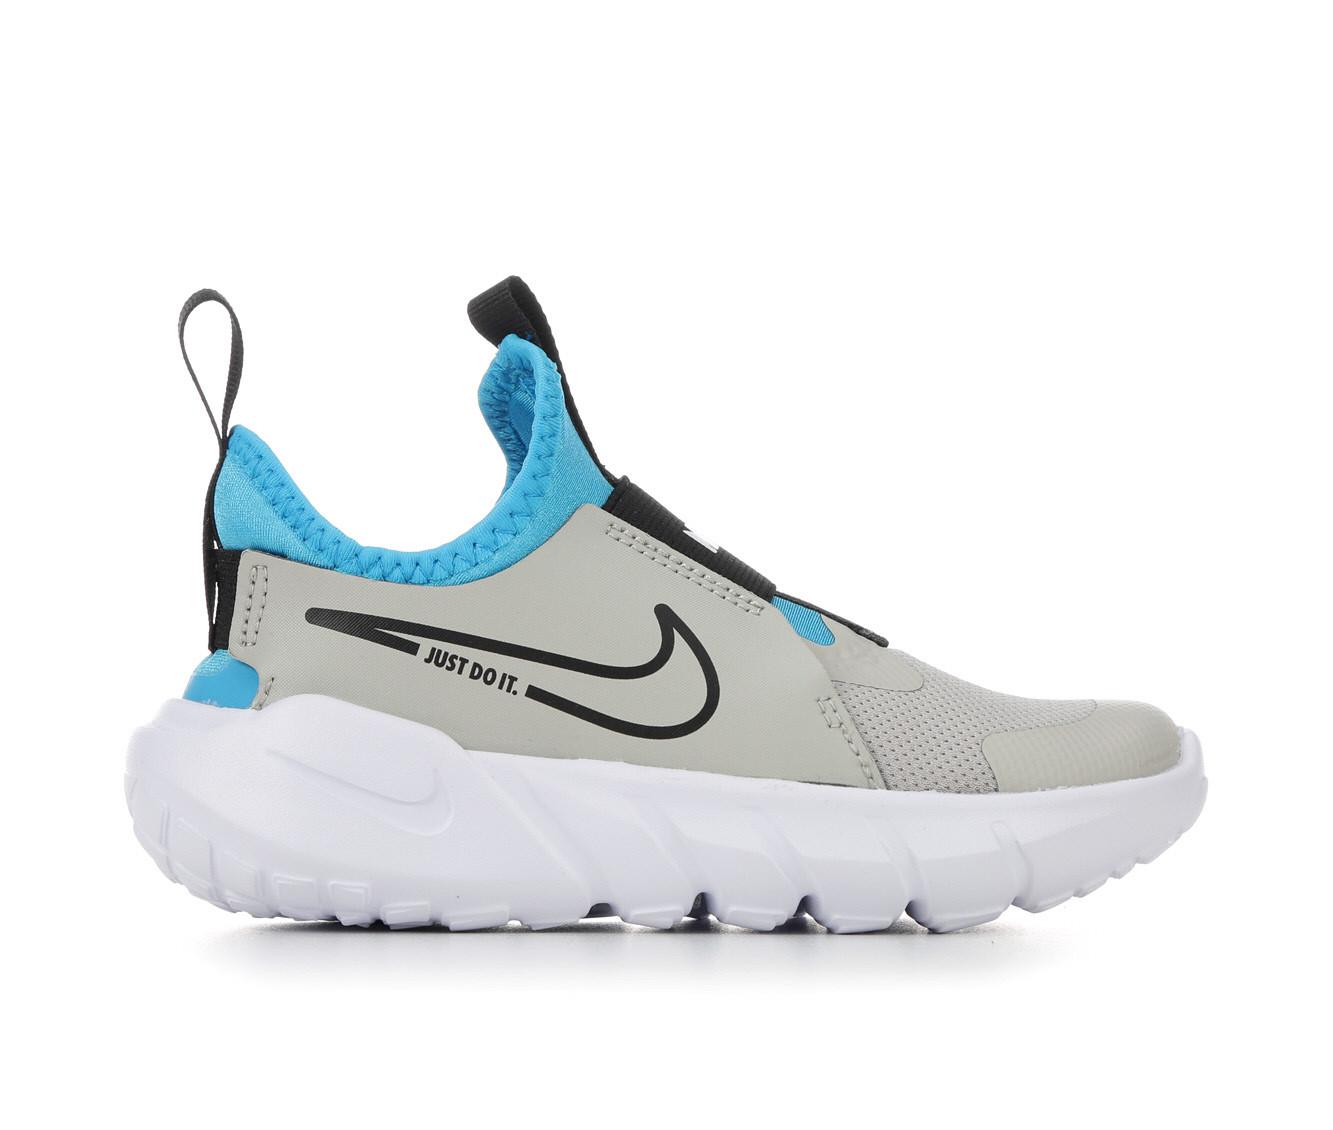 Nike Shoes, Air Max, Accessories | Shoe Carnival